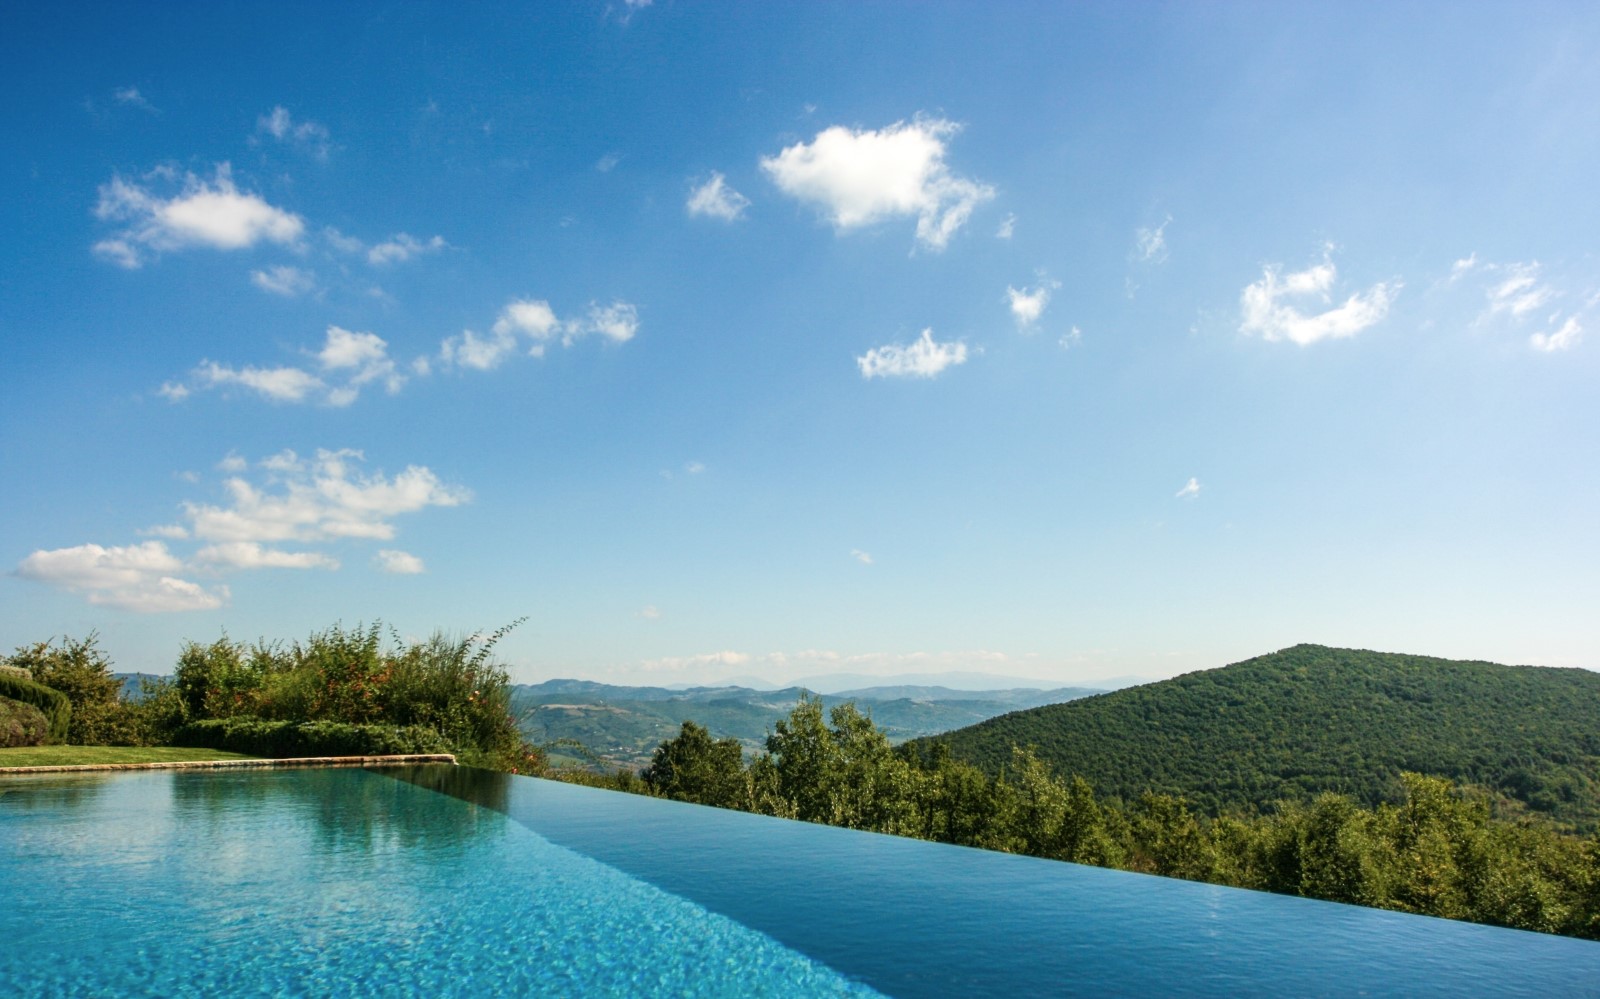 Infinity pool with countryside view at Monticello in Umbria, Italy